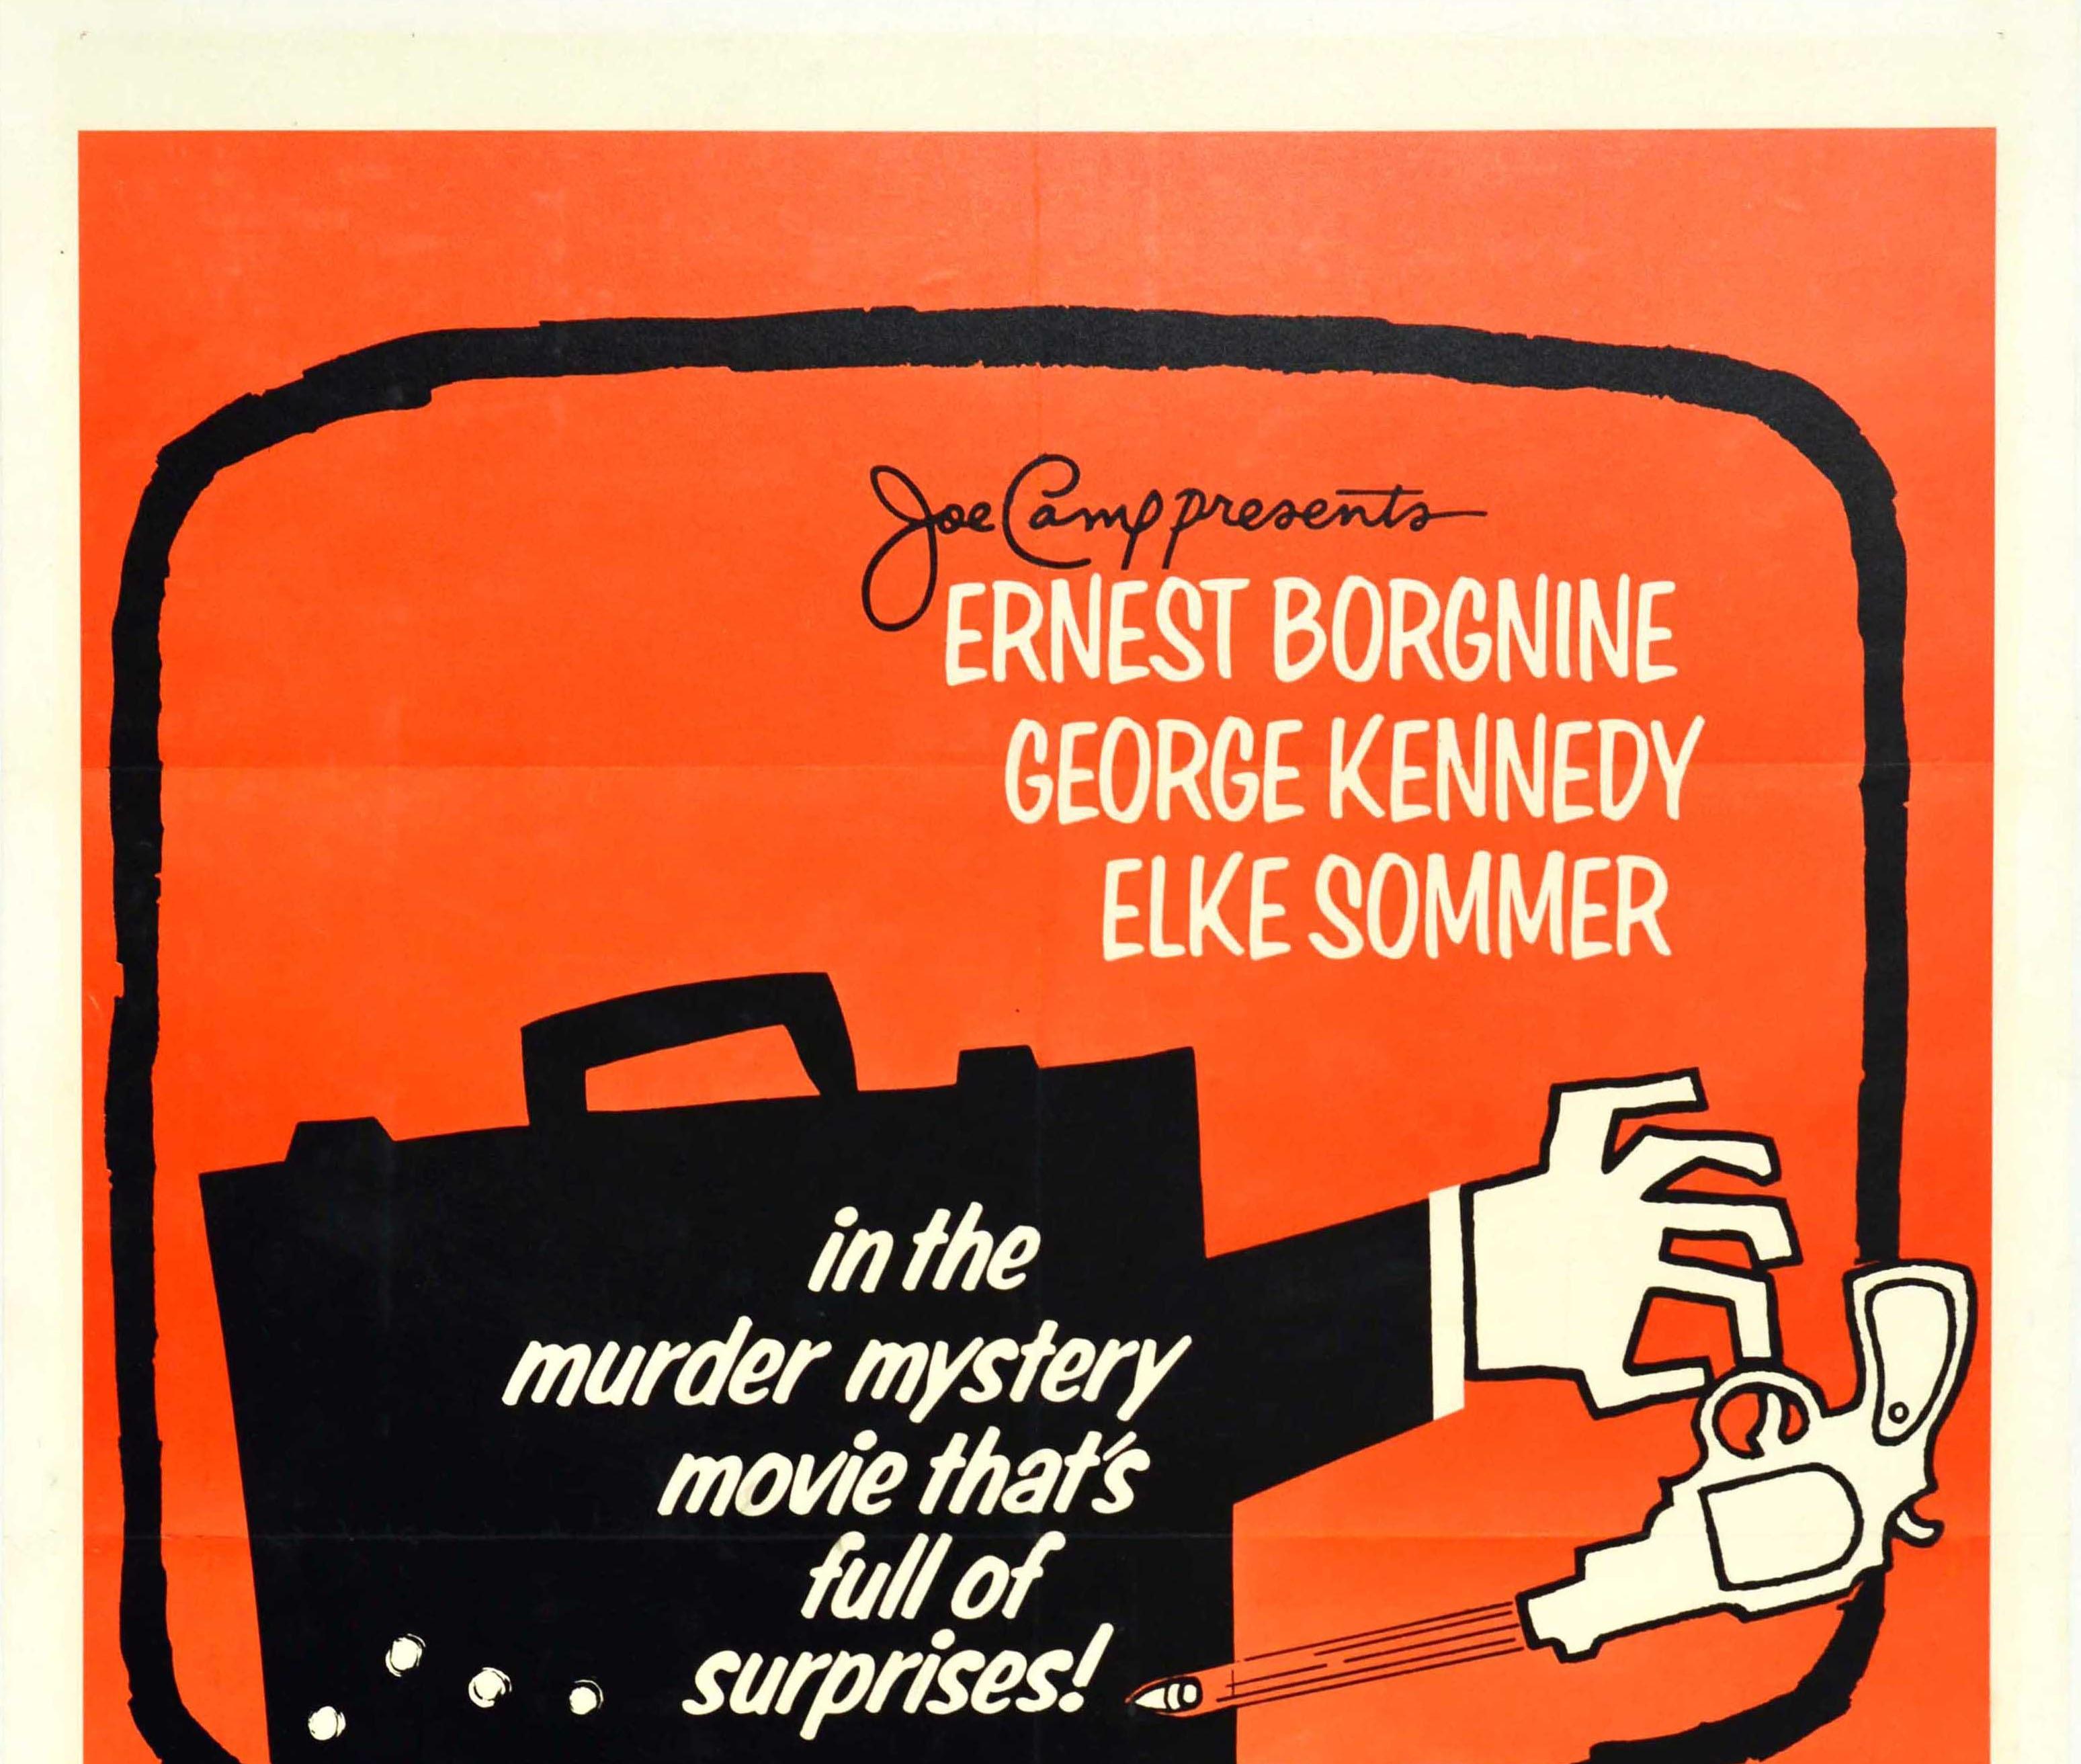 Original Vintage Poster For The Double McGuffin Con Artists Murder Mystery Movie - Print by Saul Bass